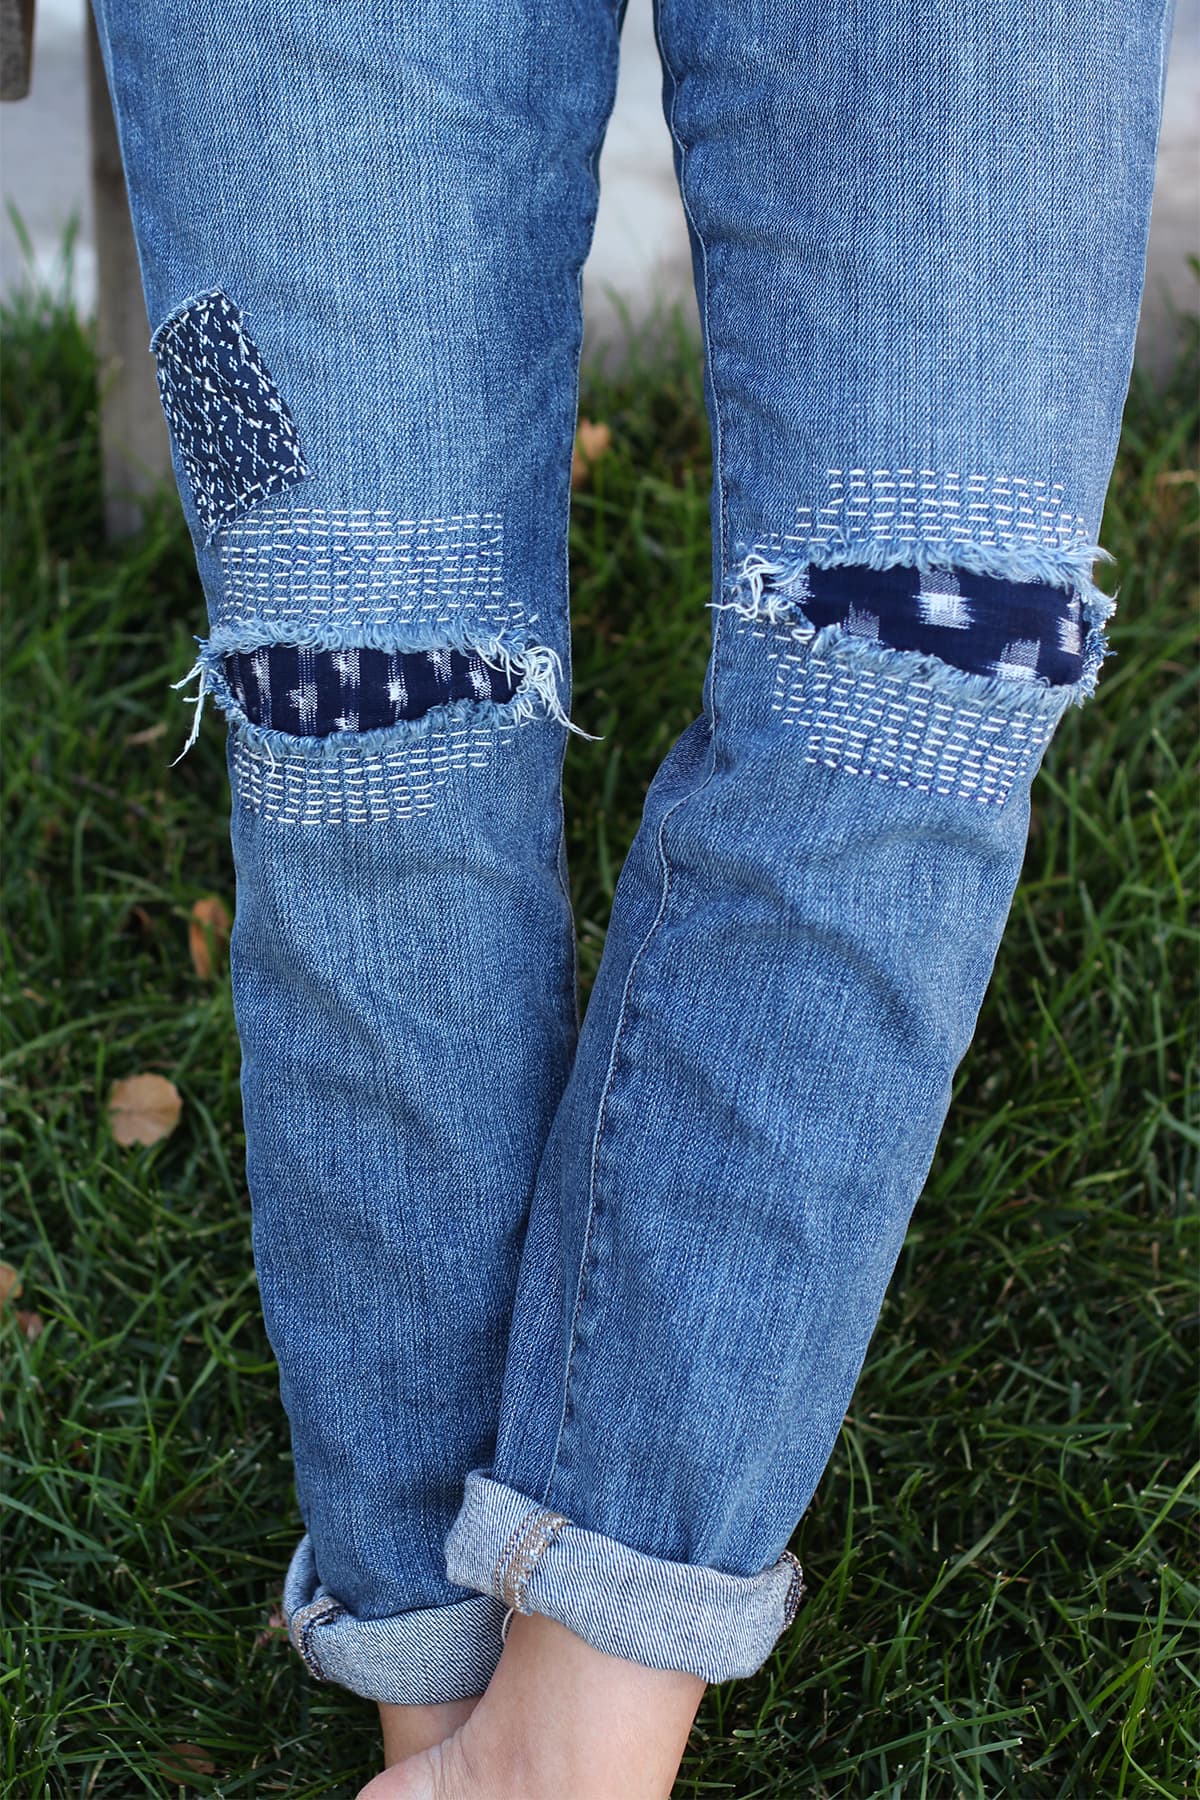 A Step-by-step Guide on How to Make Ripped Jeans at Home